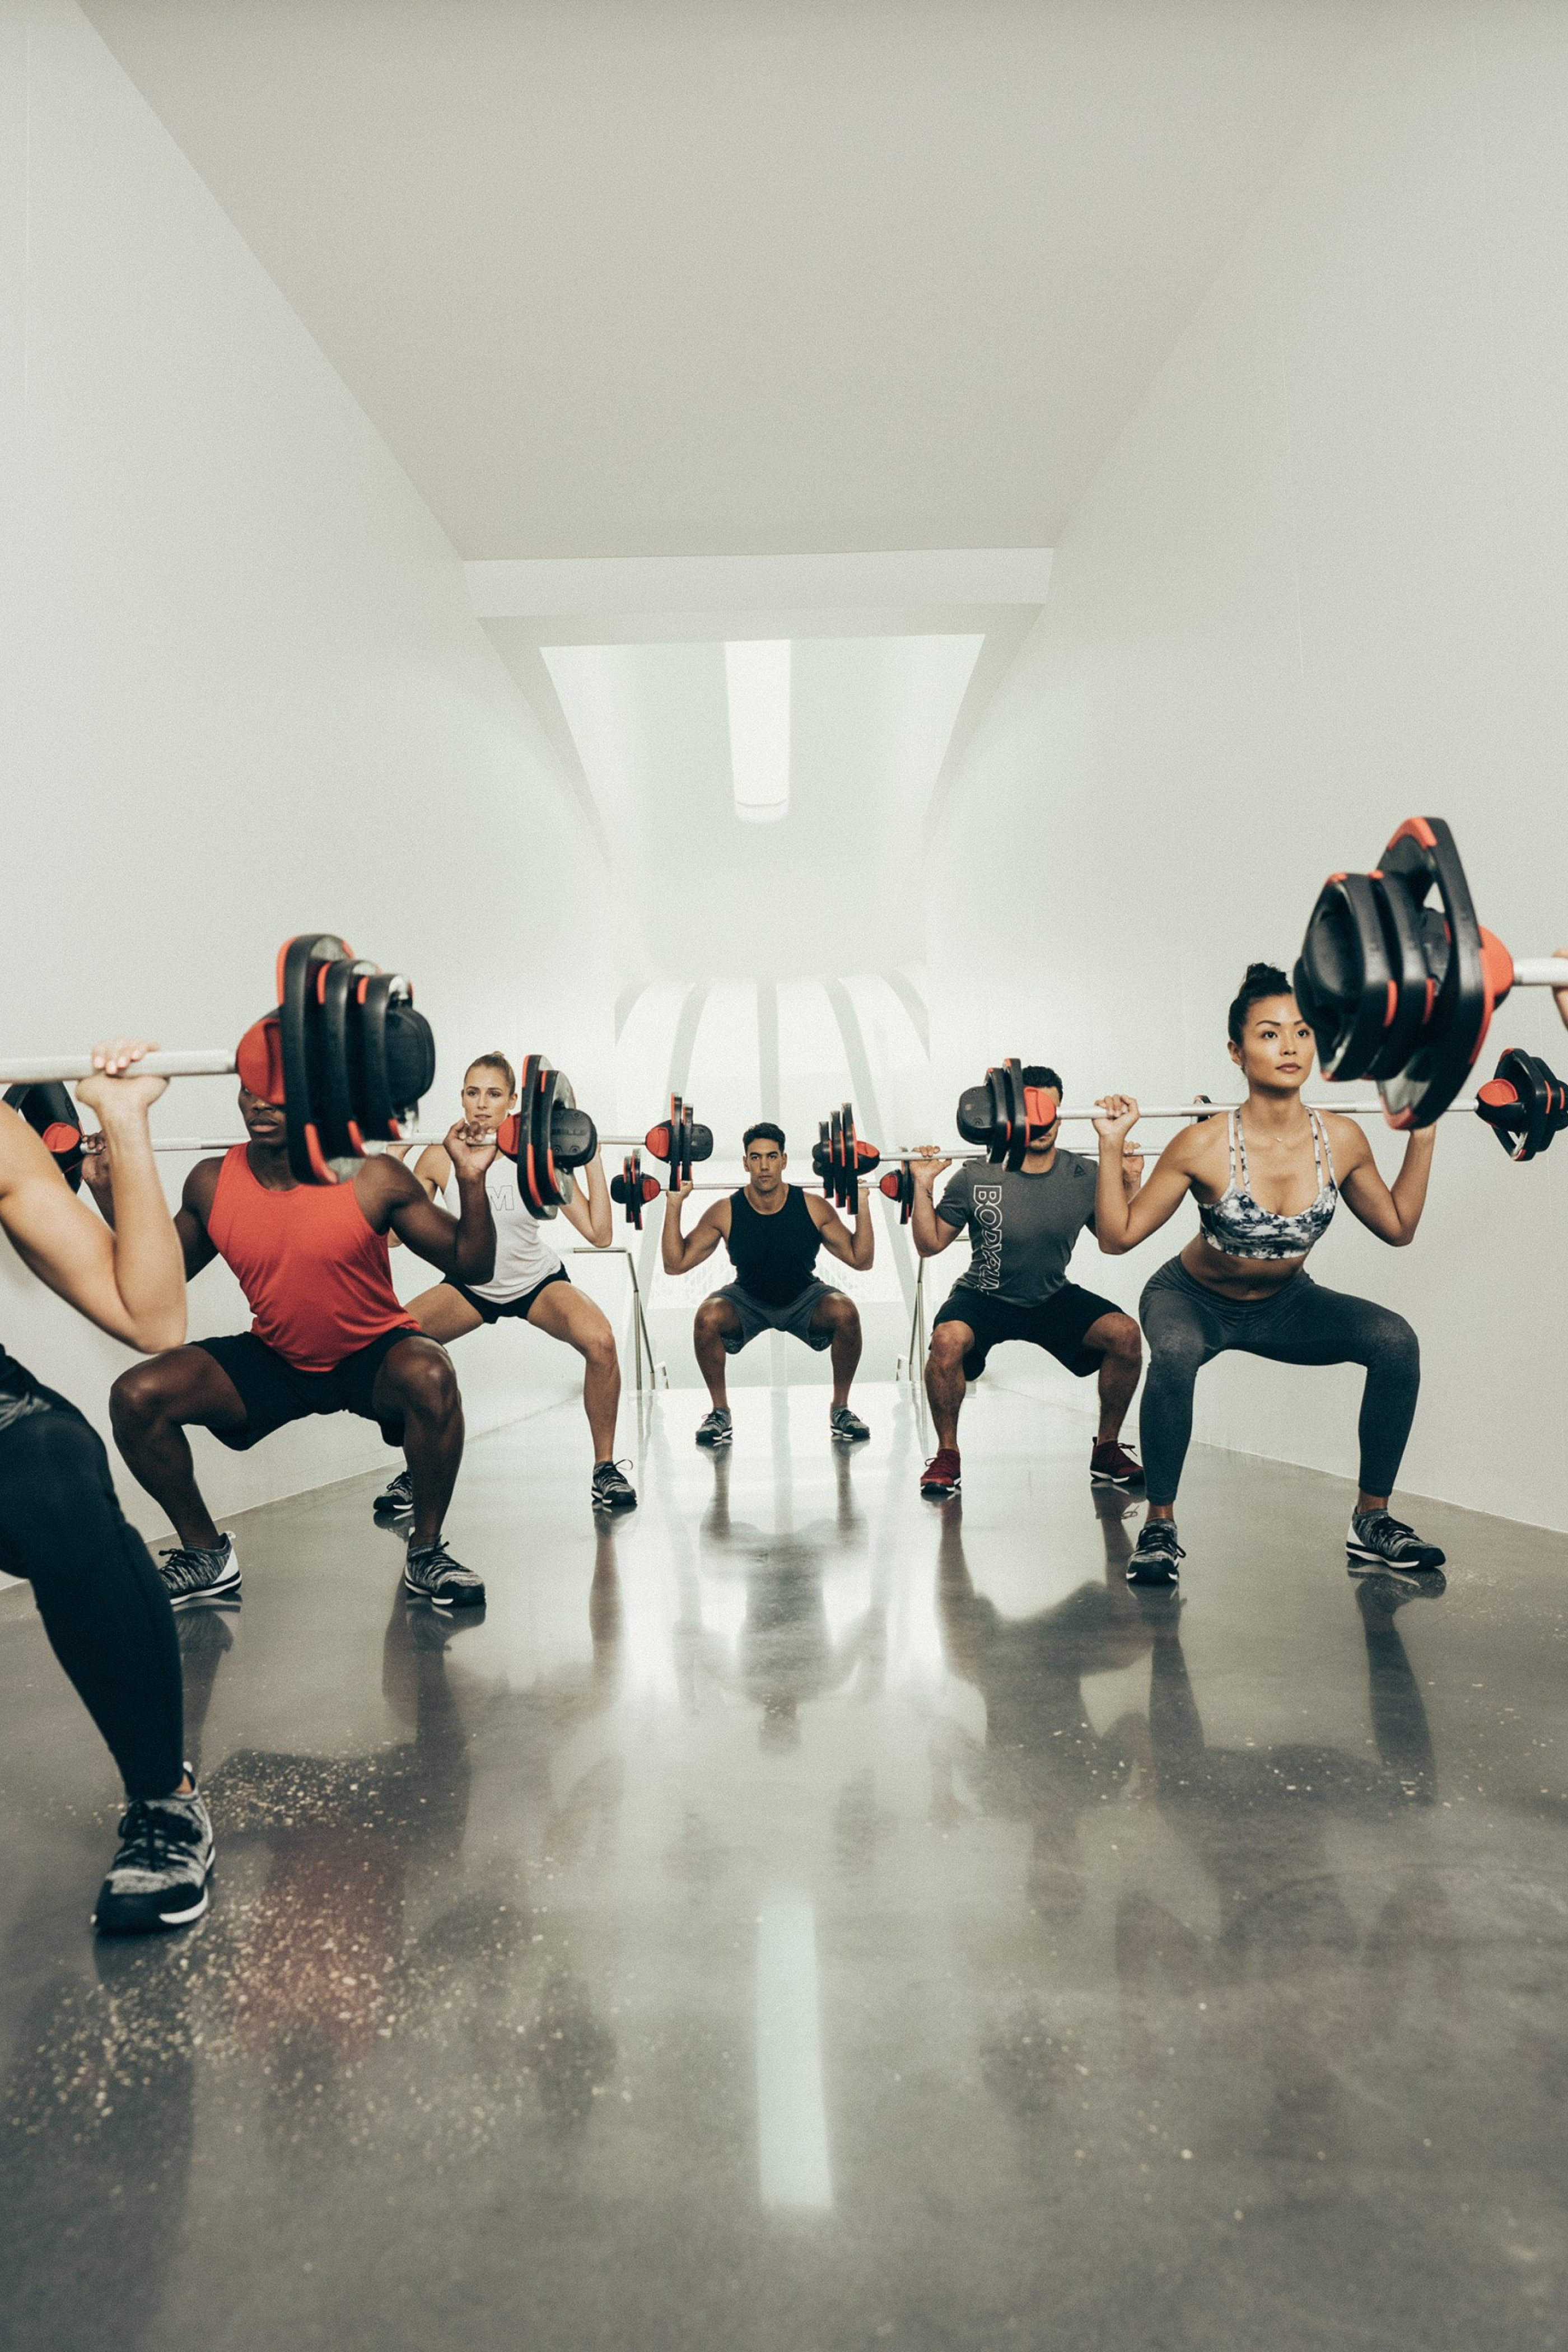 Les Mills Fitness Classes, What Are Les Mills Classes